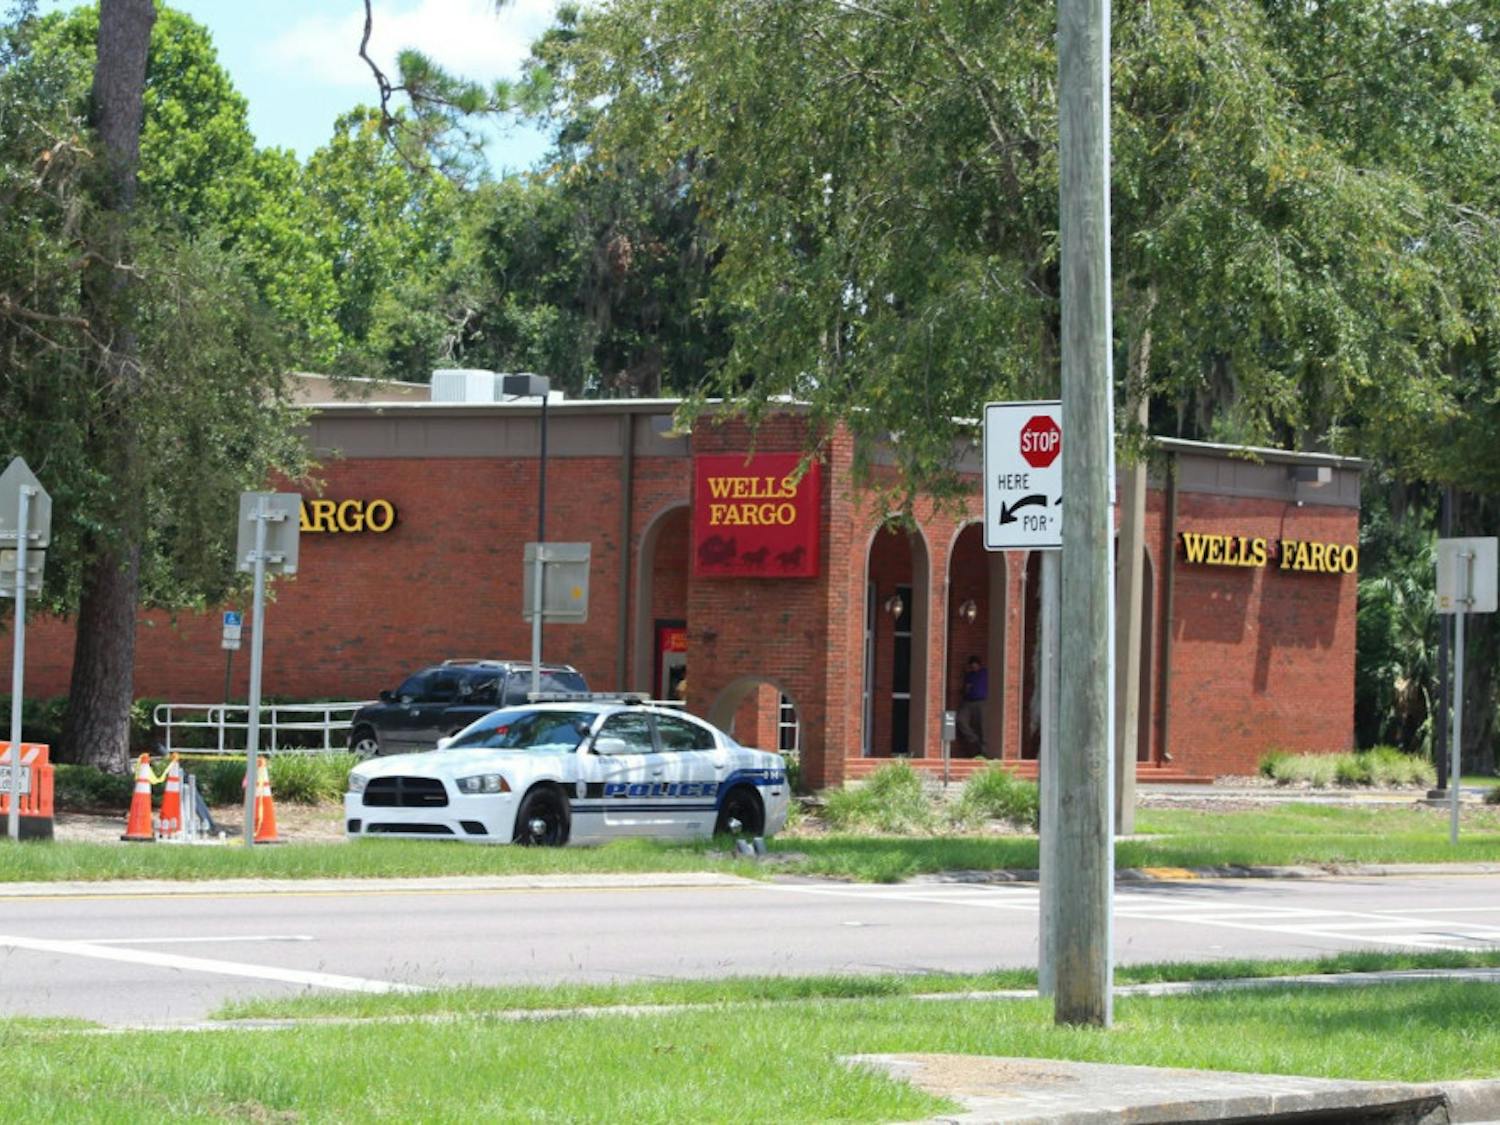 An afternoon robbery occurred at the Wells Fargo at 1717 NW 13th St.